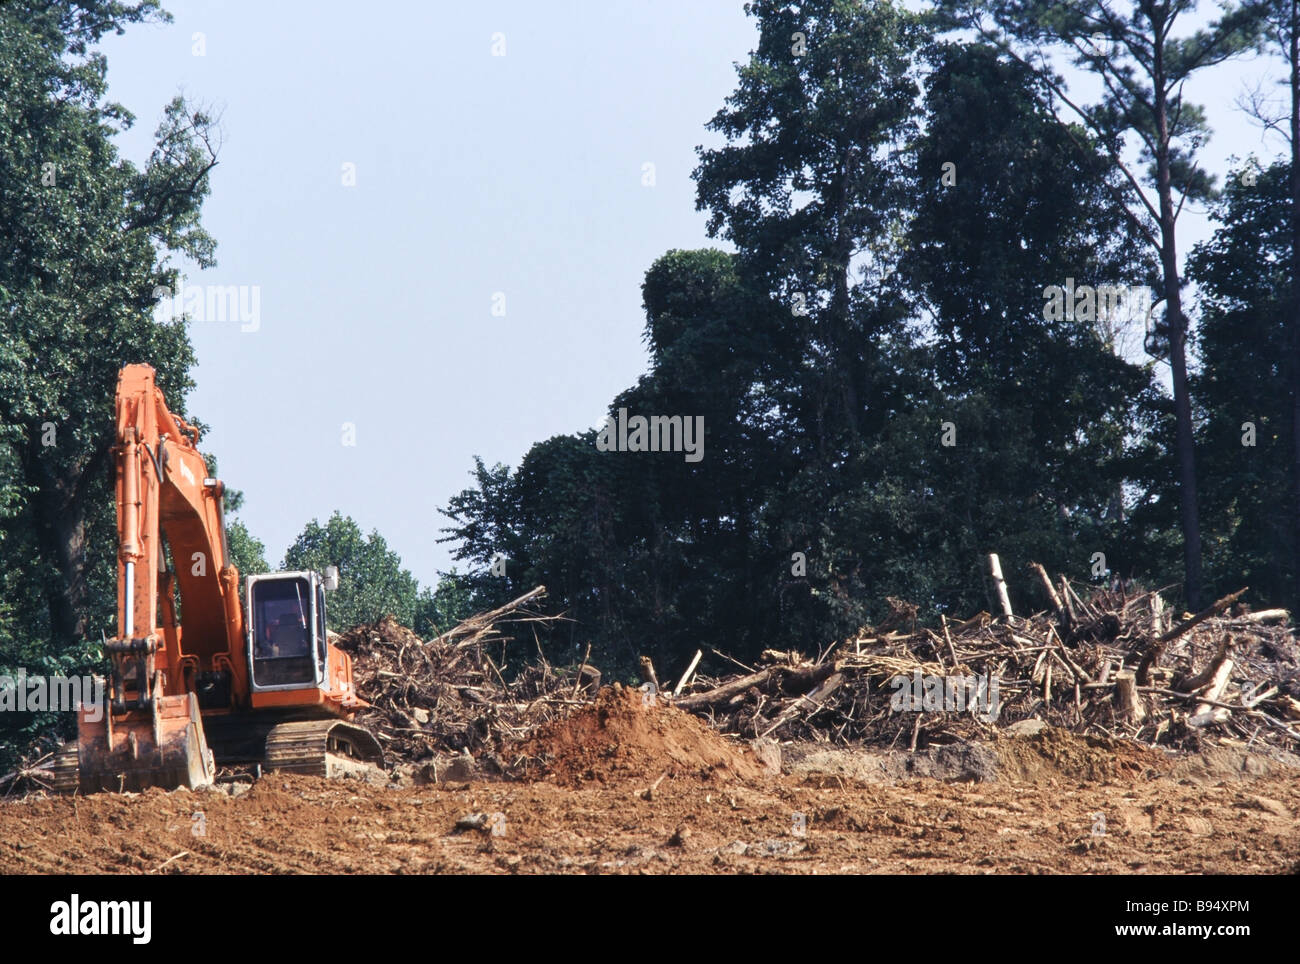 Environmental destruction, logging operations and cut trees, land clearing, development Stock Photo